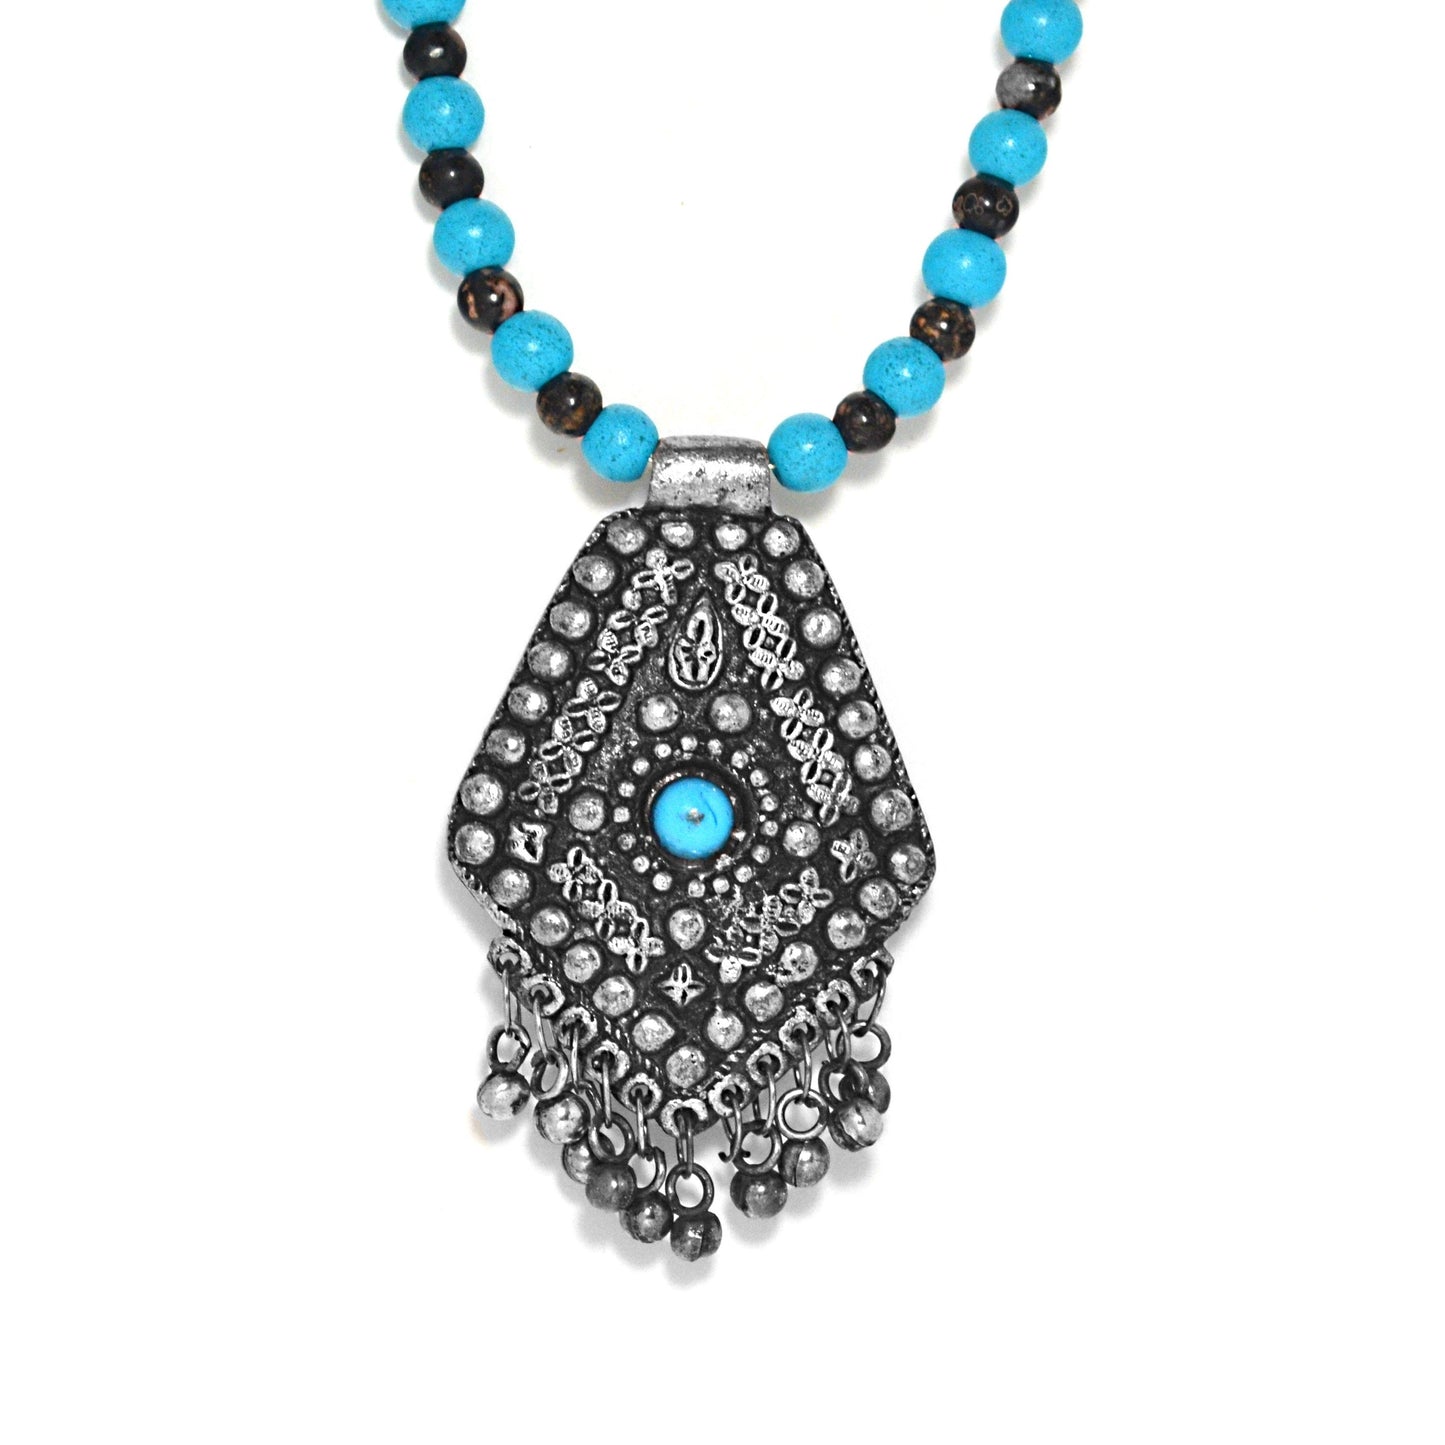 Turquoise & Pewter Bell Necklace by J.J. Dean